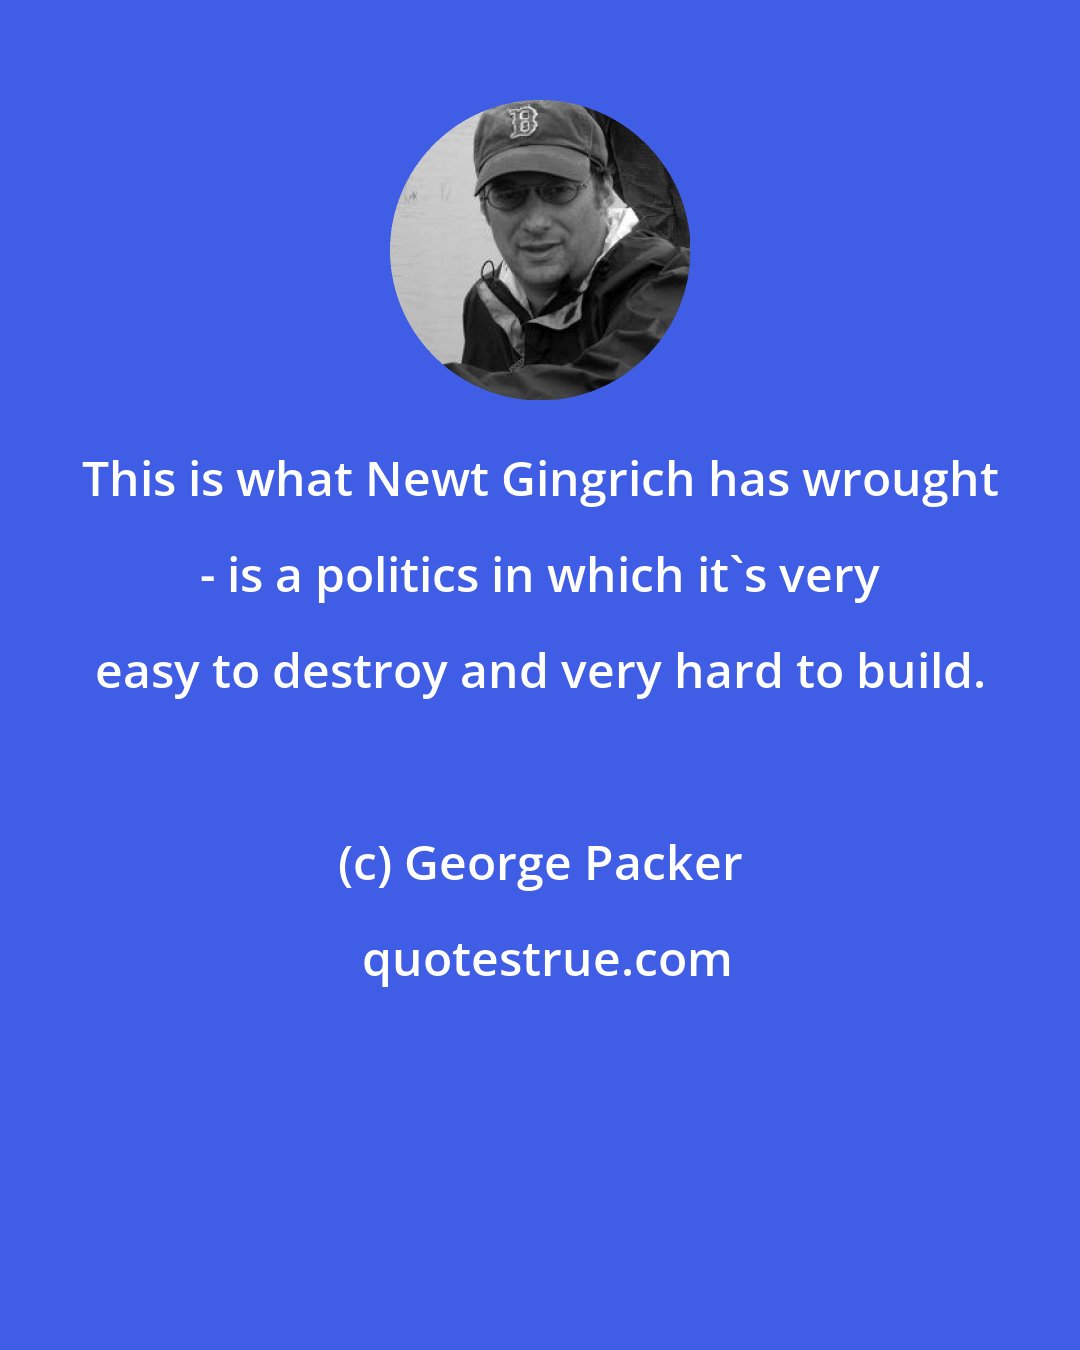 George Packer: This is what Newt Gingrich has wrought - is a politics in which it's very easy to destroy and very hard to build.